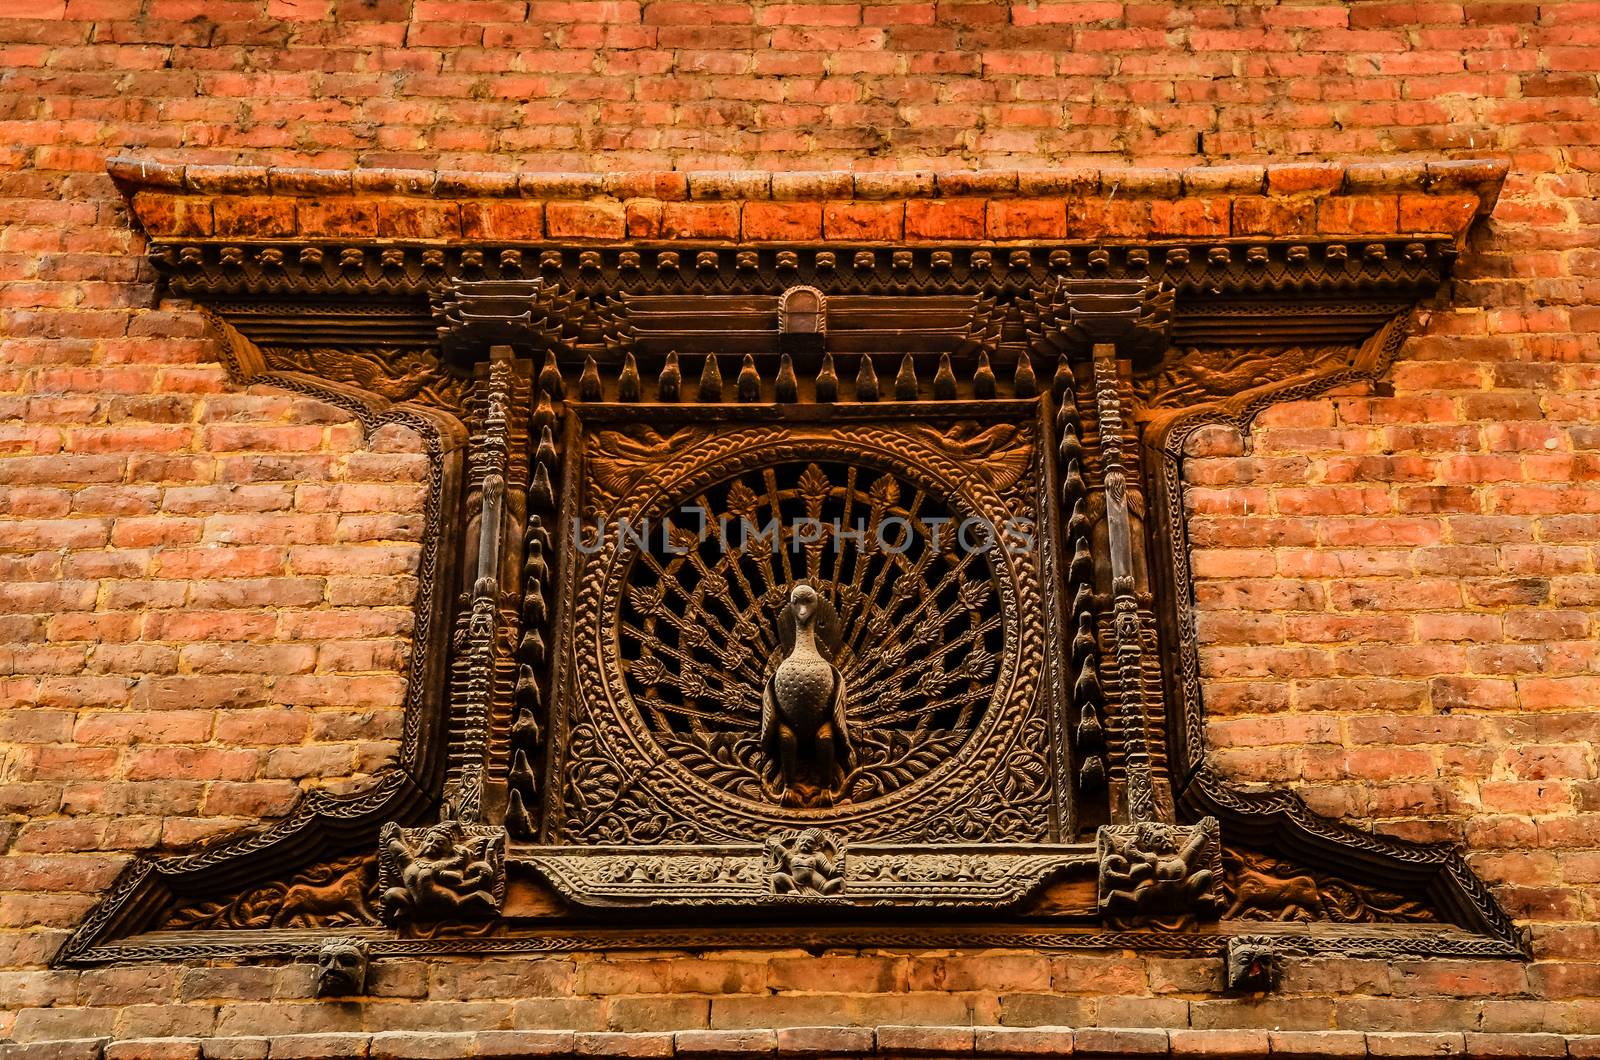 Detail of carved peacock window in Bhaktapur, Nepal by martinm303